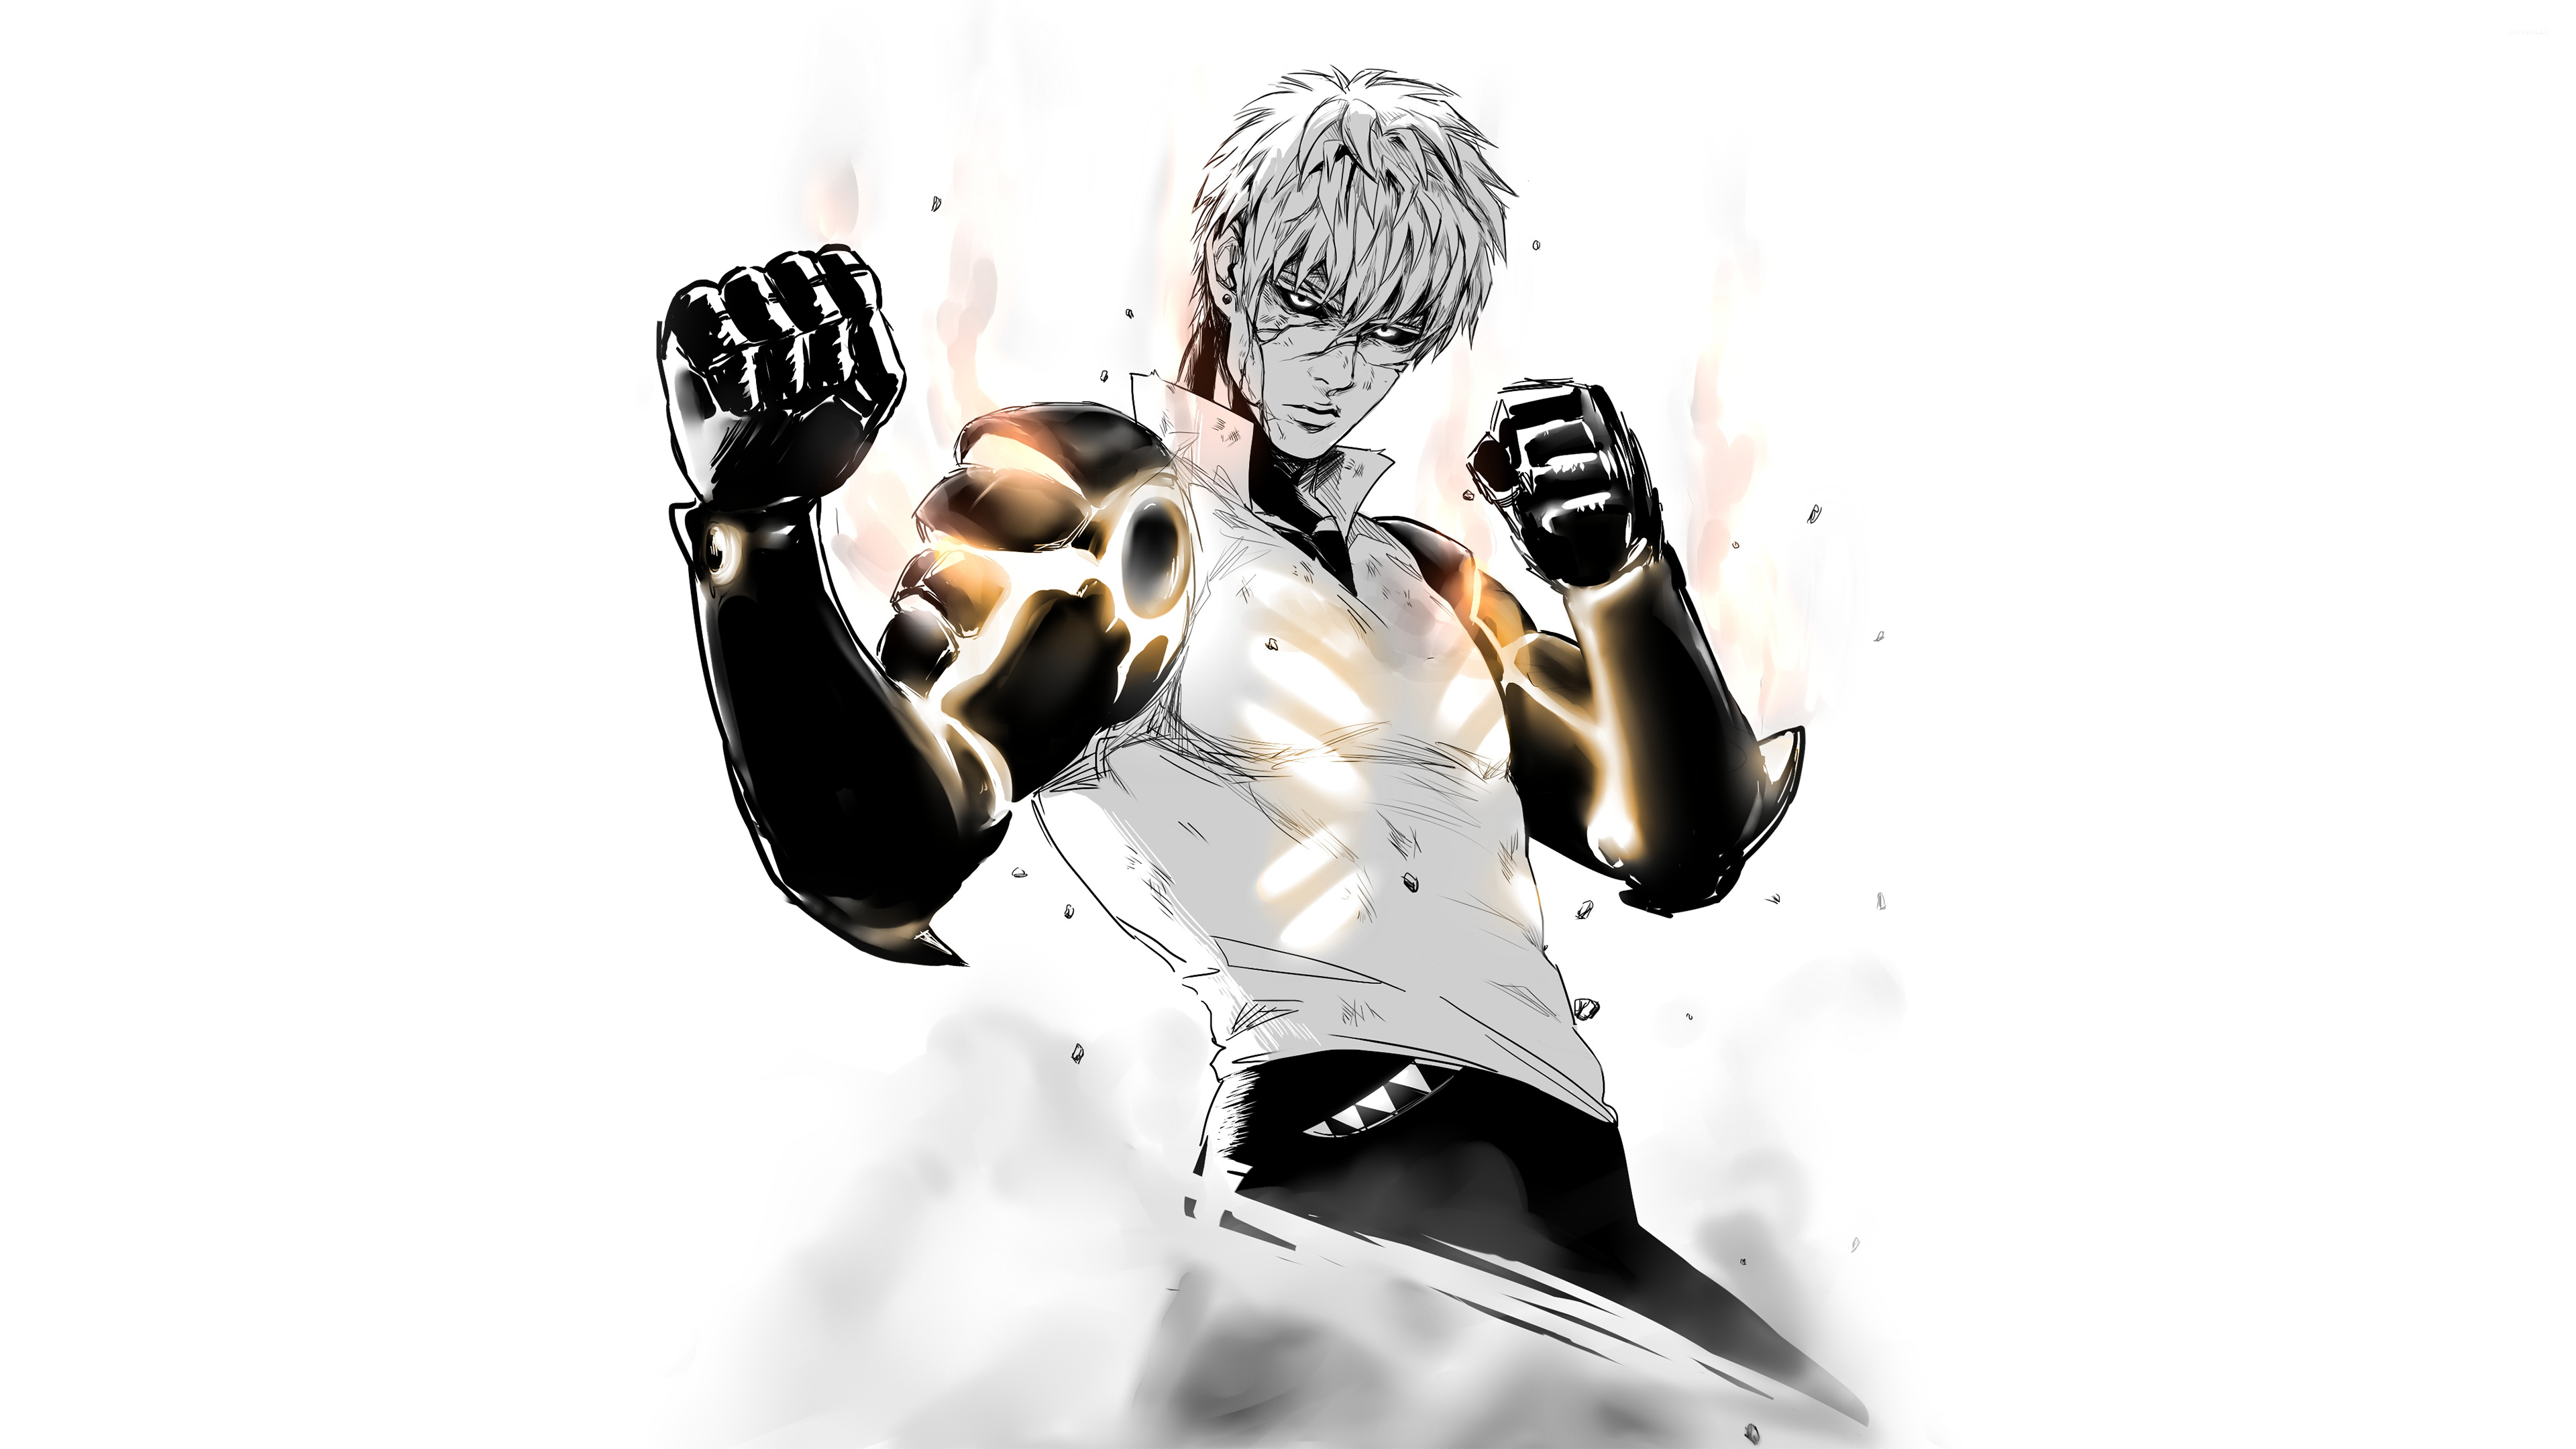 Genos ready to fight in One-Punch Man wallpaper - Anime wallpapers - #52716